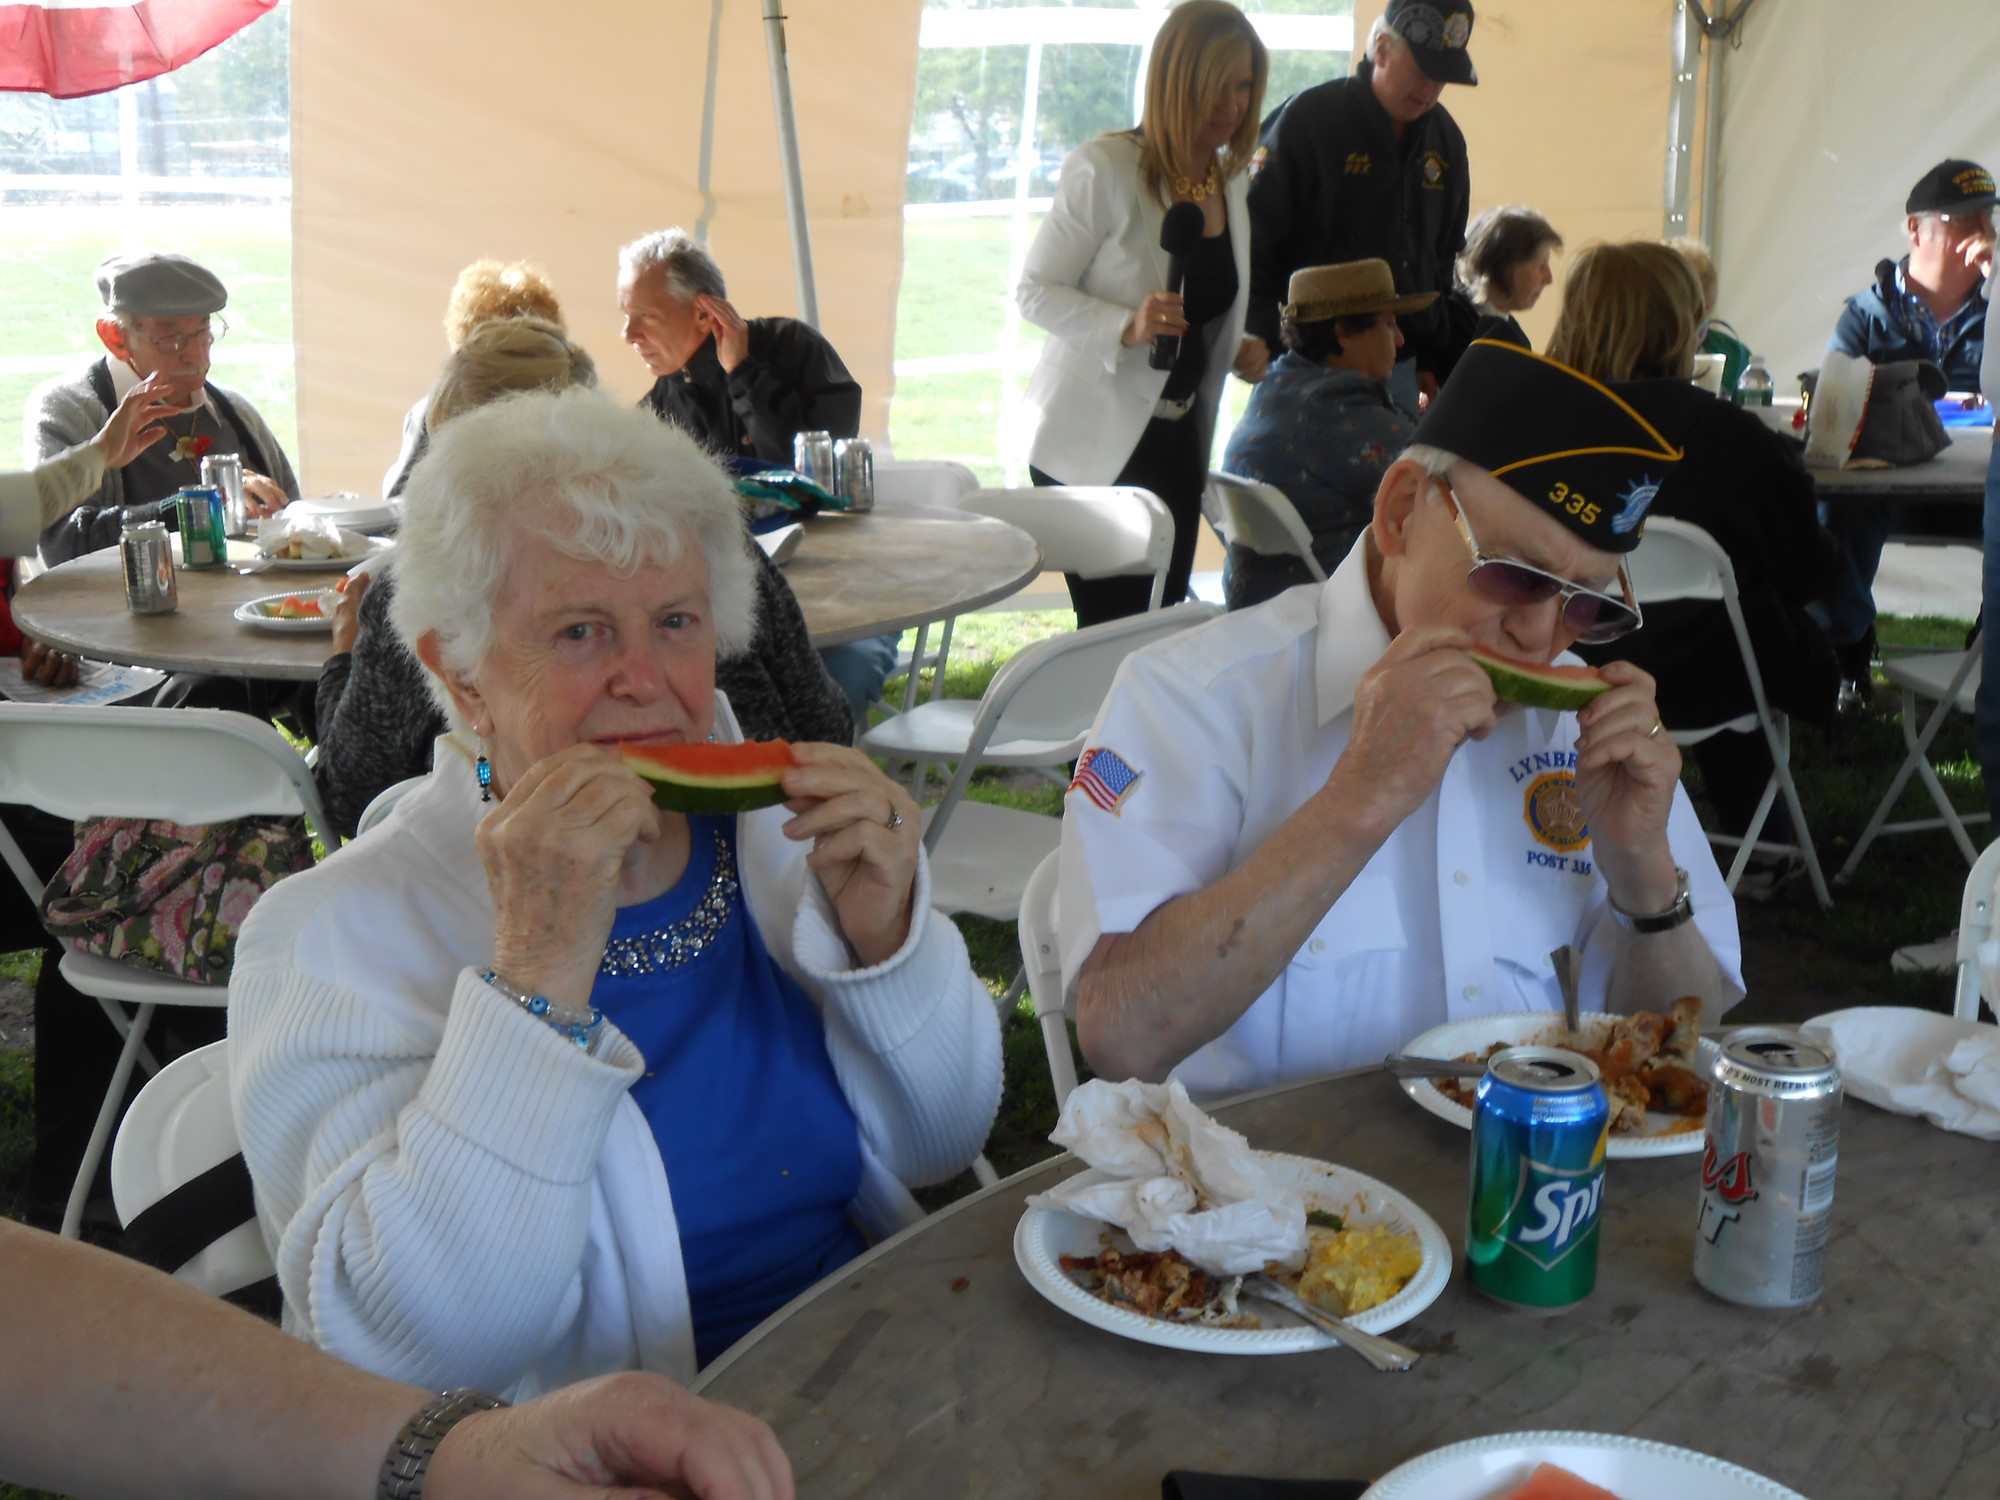 Maureen and John Zachmann, of Lynbrook, enjoyed their juicy slices of watermelon under the VIP veteran tent.